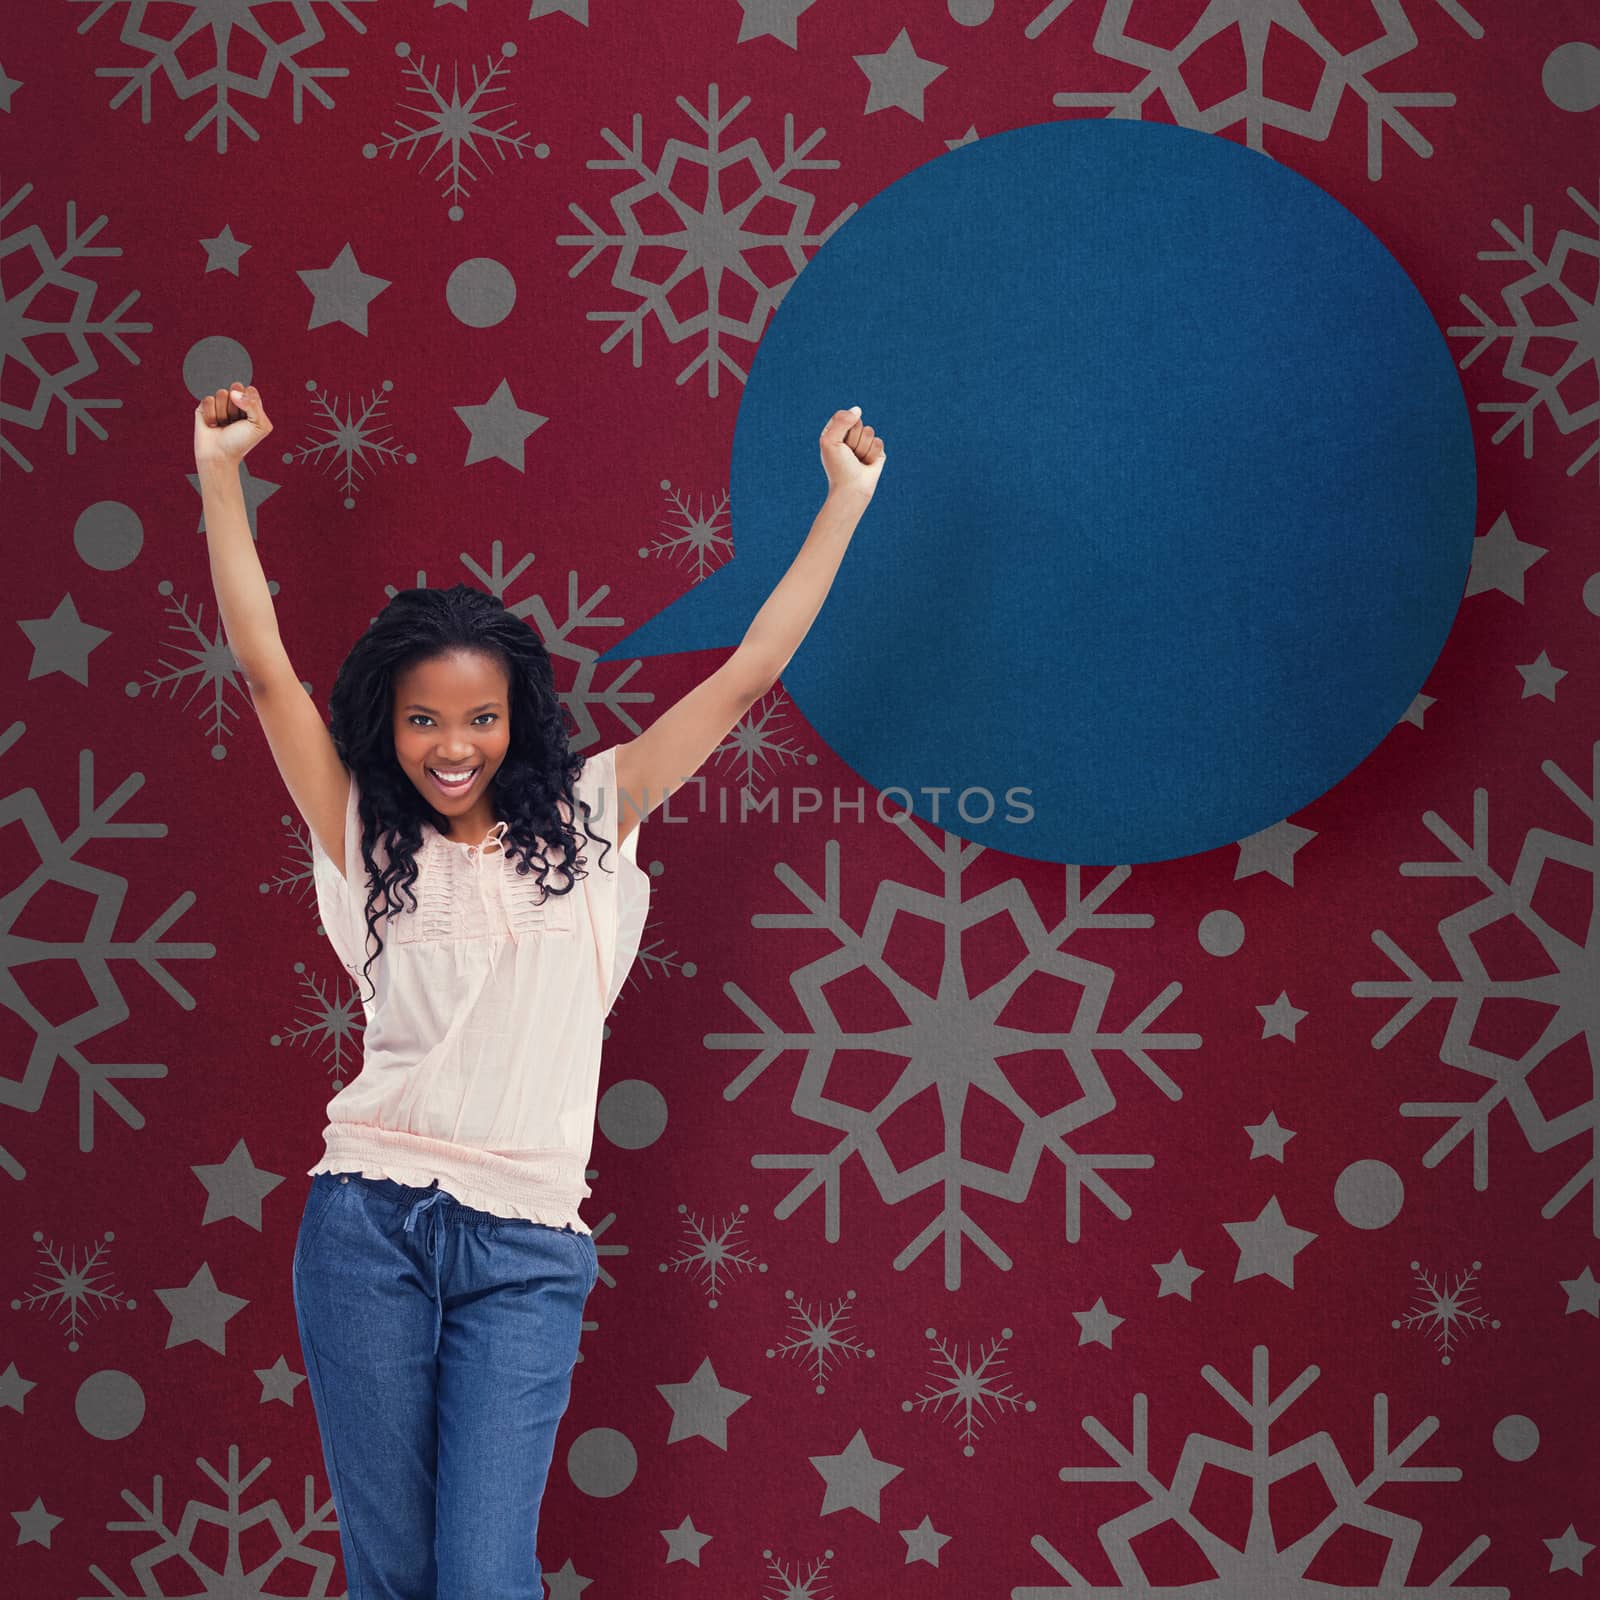 A young happy woman stands with her hands in the air against red vignette